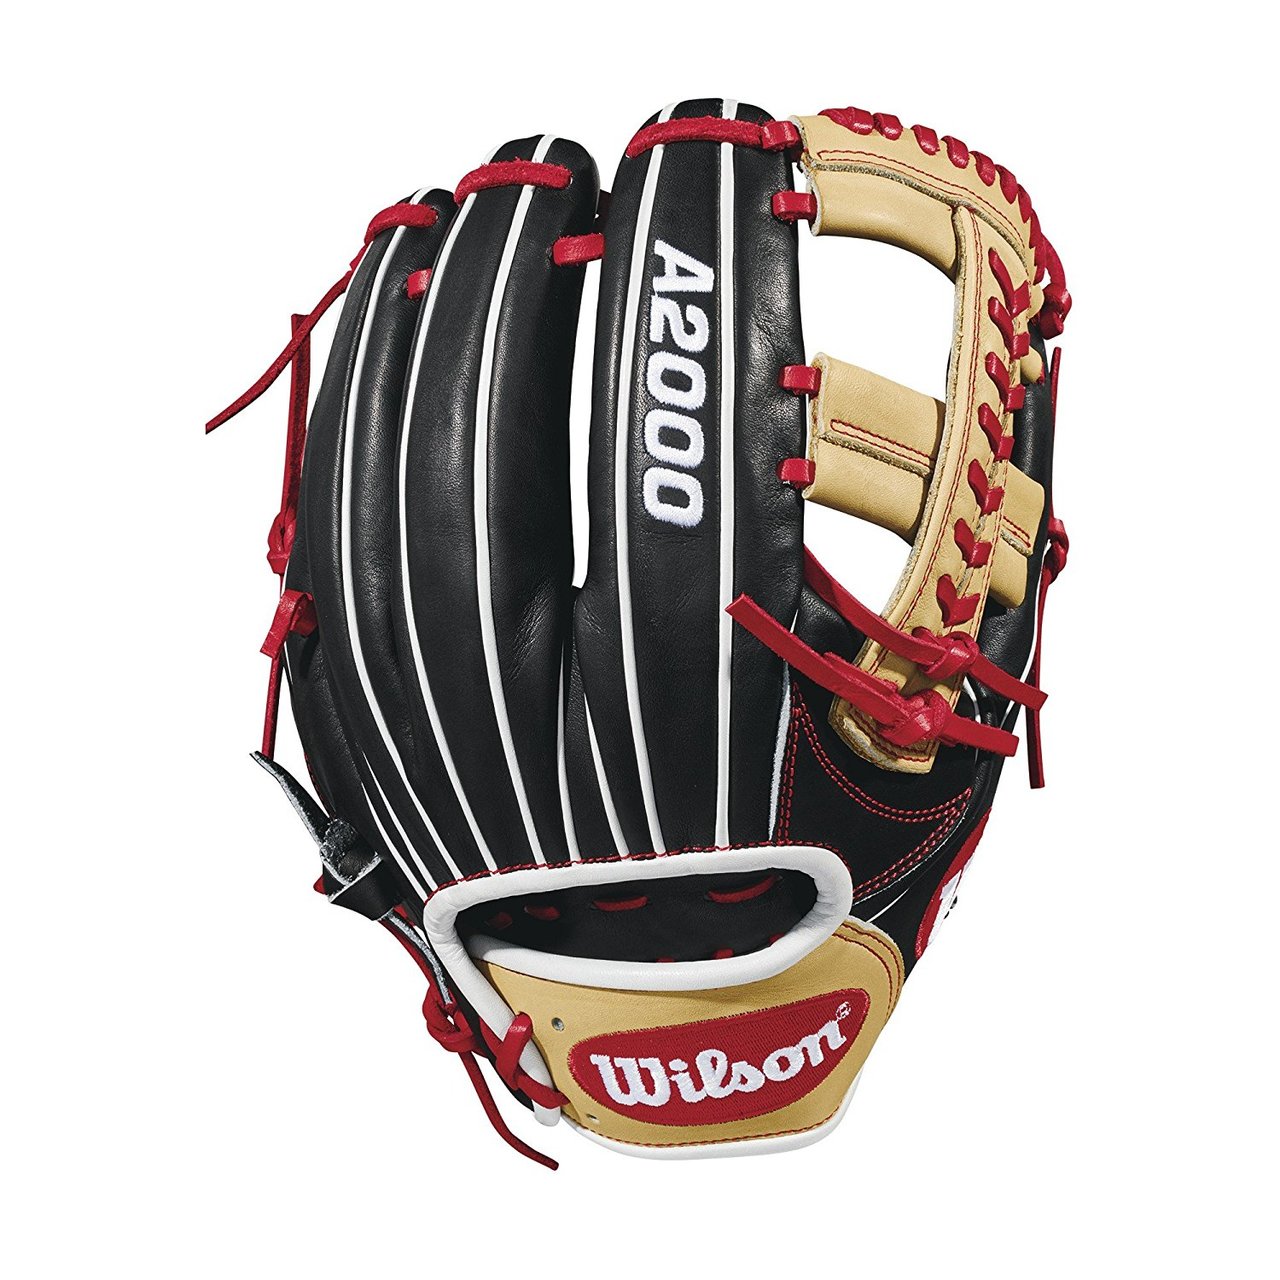 11.75 Cross web with Baseball stitch New pattern featuring gap welting Black, blonde and Red Pro Stock leather, preferred for its rugged durability and unmatched feel Dual welting for a durable pocket and long-lasting break-in